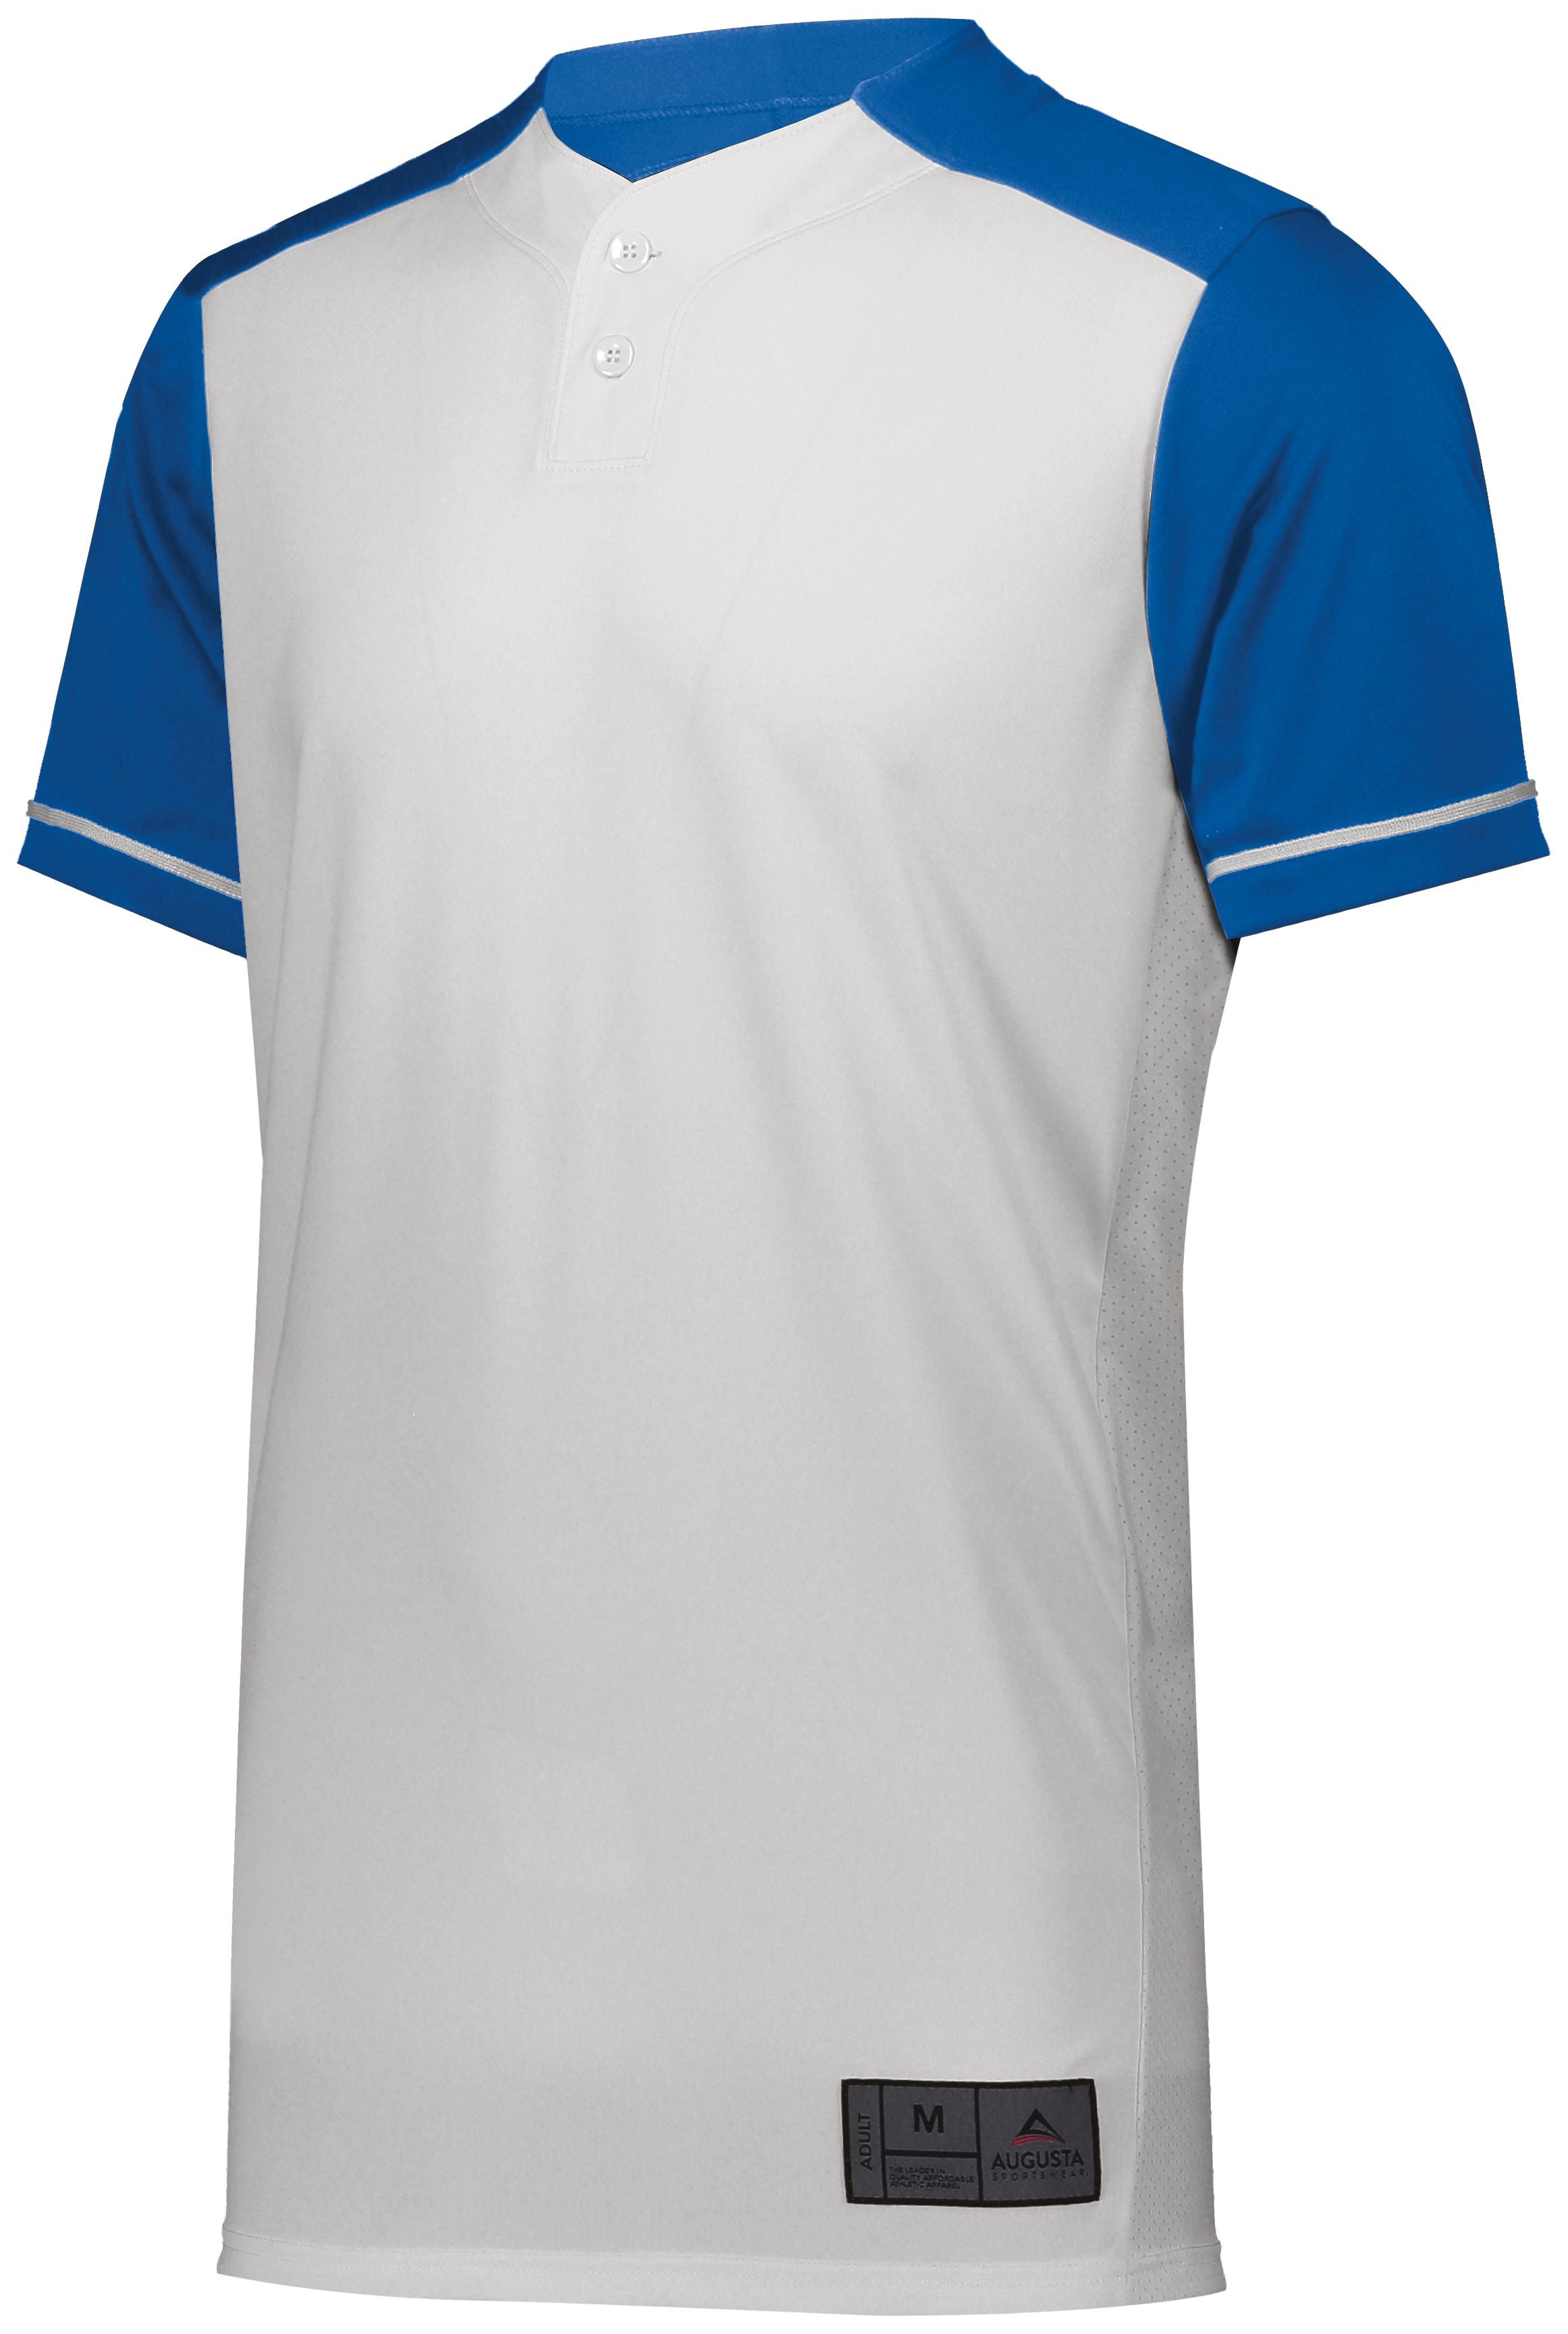 Augusta Sportswear Closer Jersey in White/Royal  -Part of the Adult, Adult-Jersey, Augusta-Products, Baseball, Shirts, All-Sports, All-Sports-1 product lines at KanaleyCreations.com